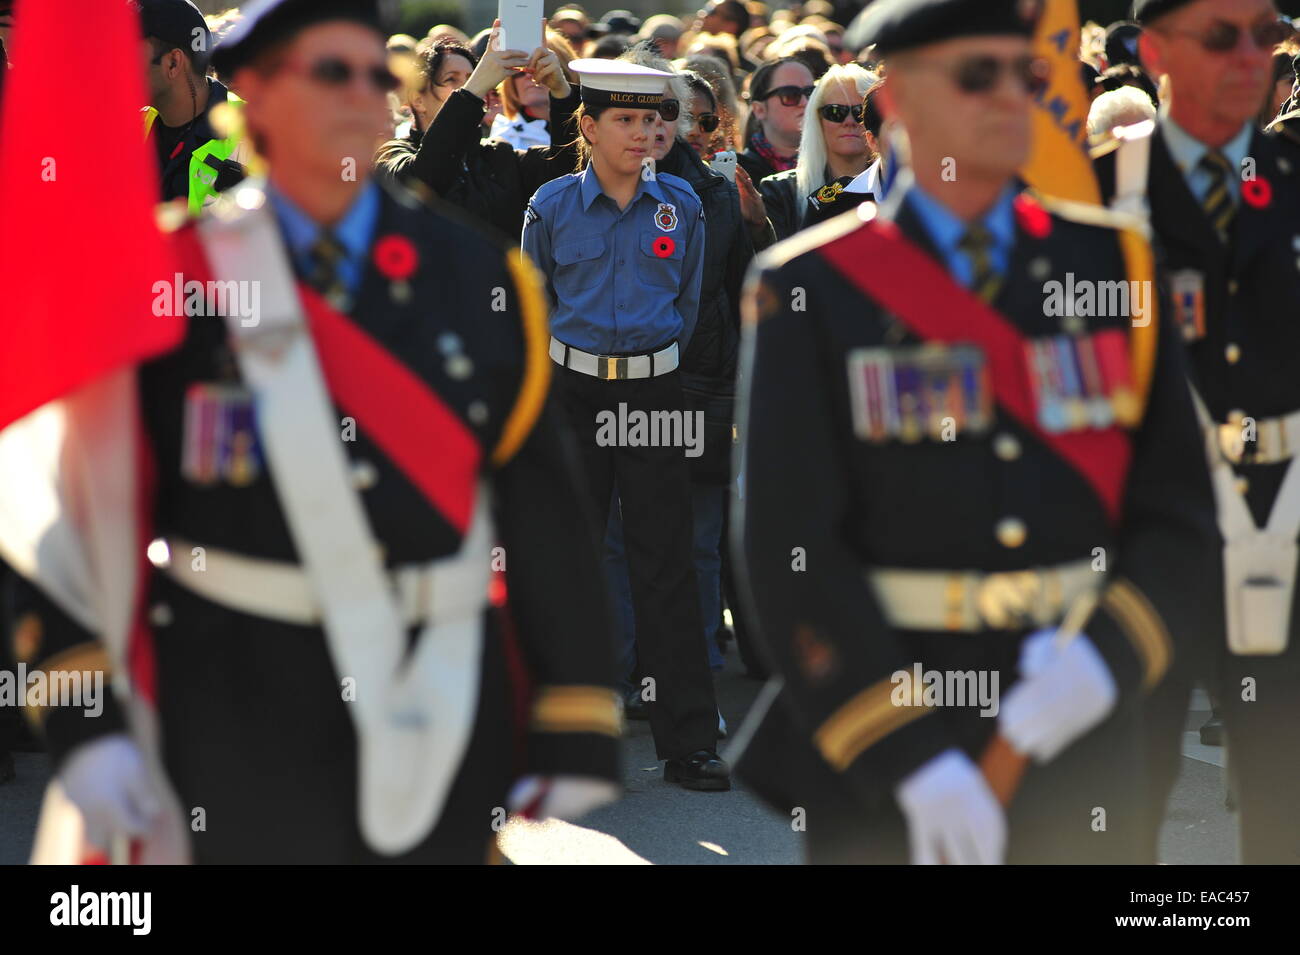 London, Ontario, Canada. 11th November, 2014. Past and present members of the Canadian armed services and members of the public gather at the Cenotaph in London, Ontario to observe Remembrance Day. On this public holiday nationwide communities hold ceremonies to pay respect to fallen soldiers. Credit:  Jonny White/Alamy Live News Stock Photo